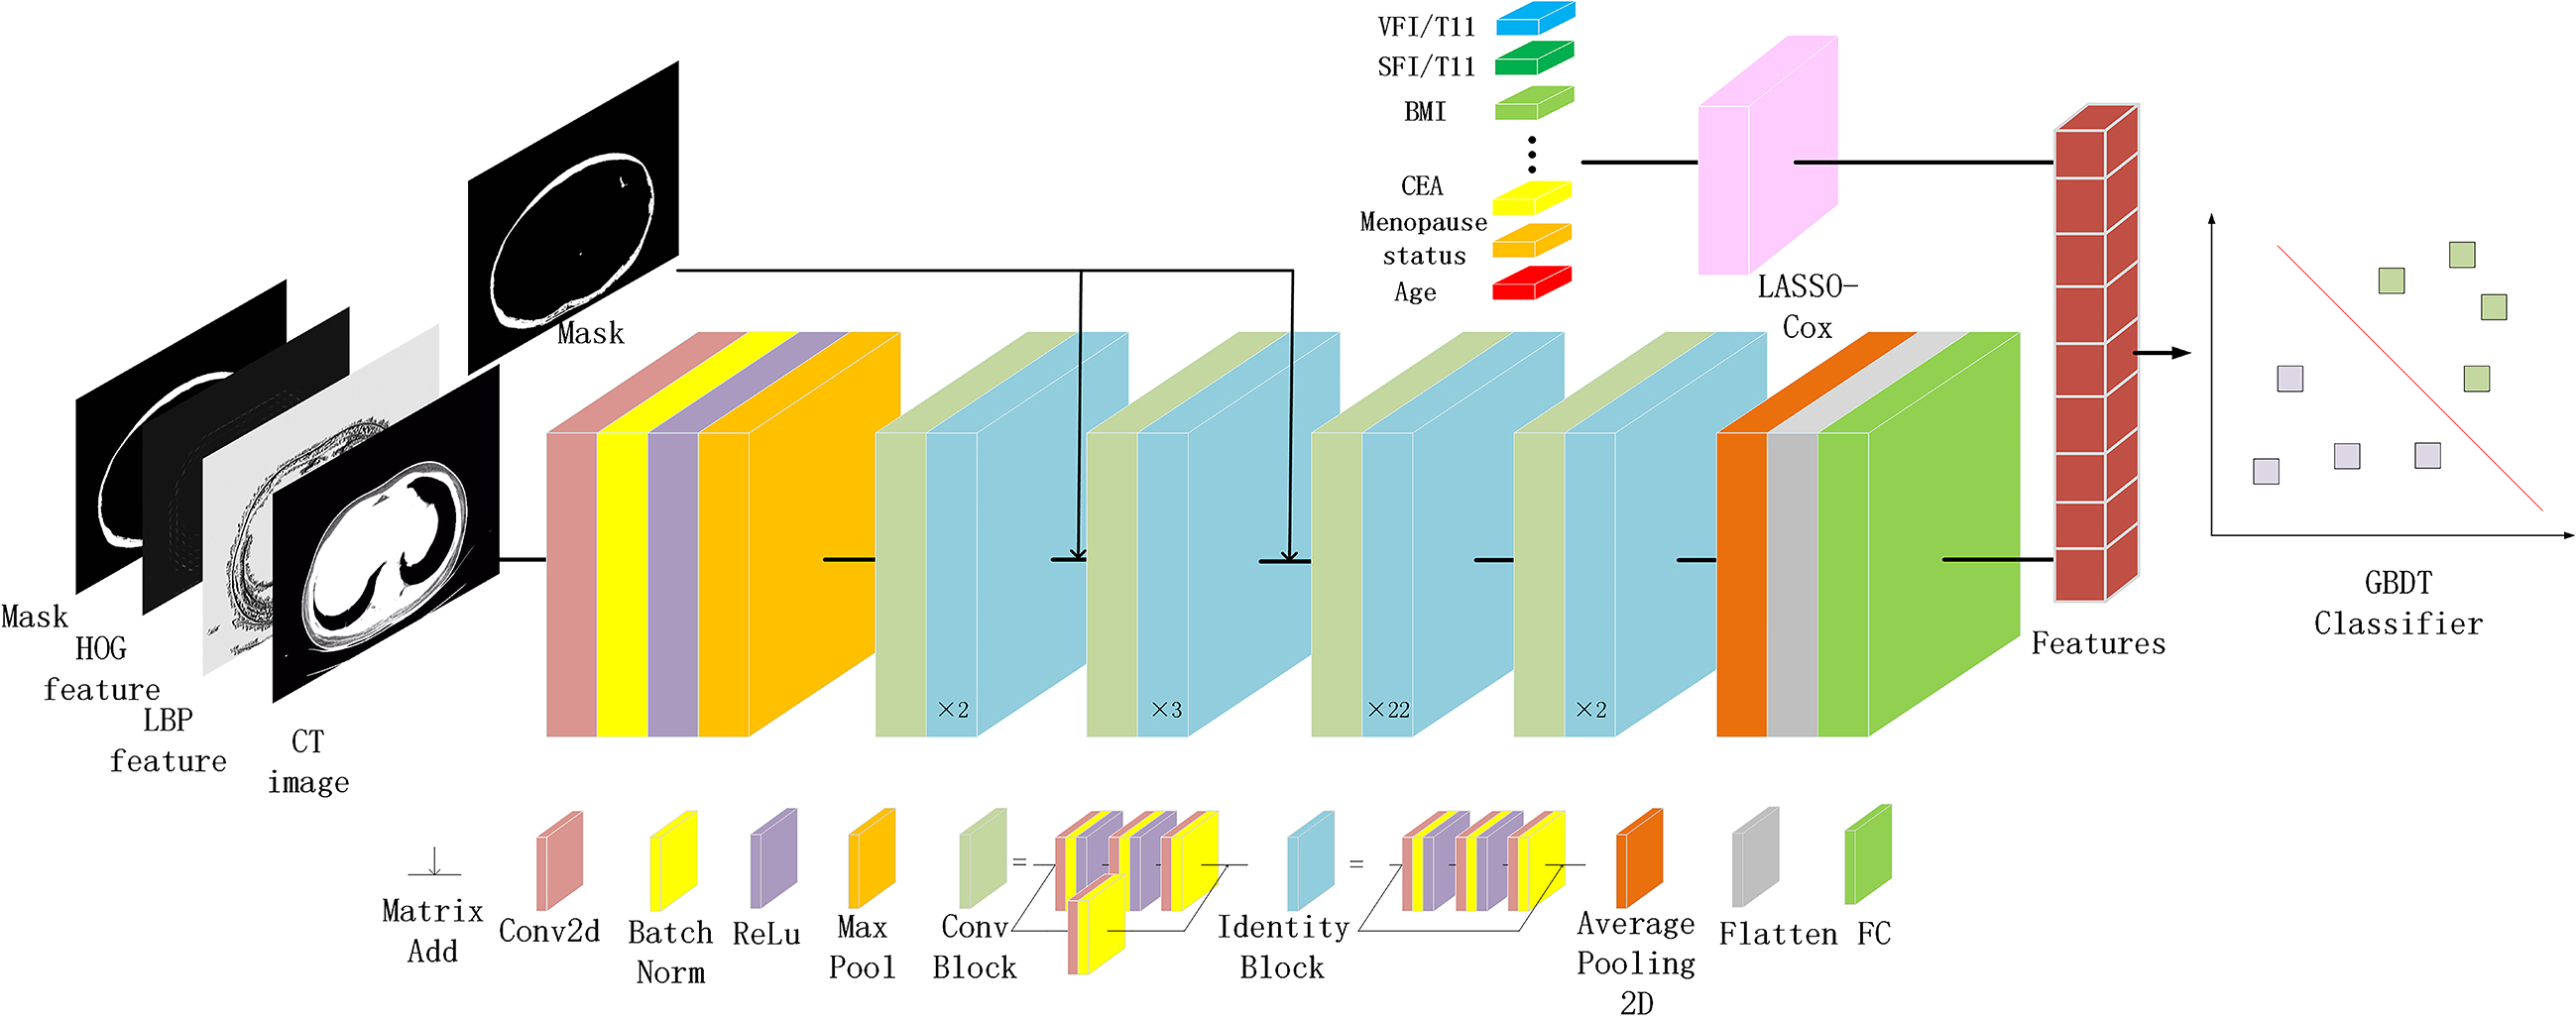 The overall pipeline of the model. The fat area mask, LBP feature, HOG feature, and CT image are combined according to the channel dimension to form the input. ResNet combines the attention mechanism guided by the fat mask to form an encoder model to extract features from image data. Lasso-Cox screens clinical information data for features, and then combines them with extracted network features to form multimodal data. GBDT is a classifier for multimodal data.